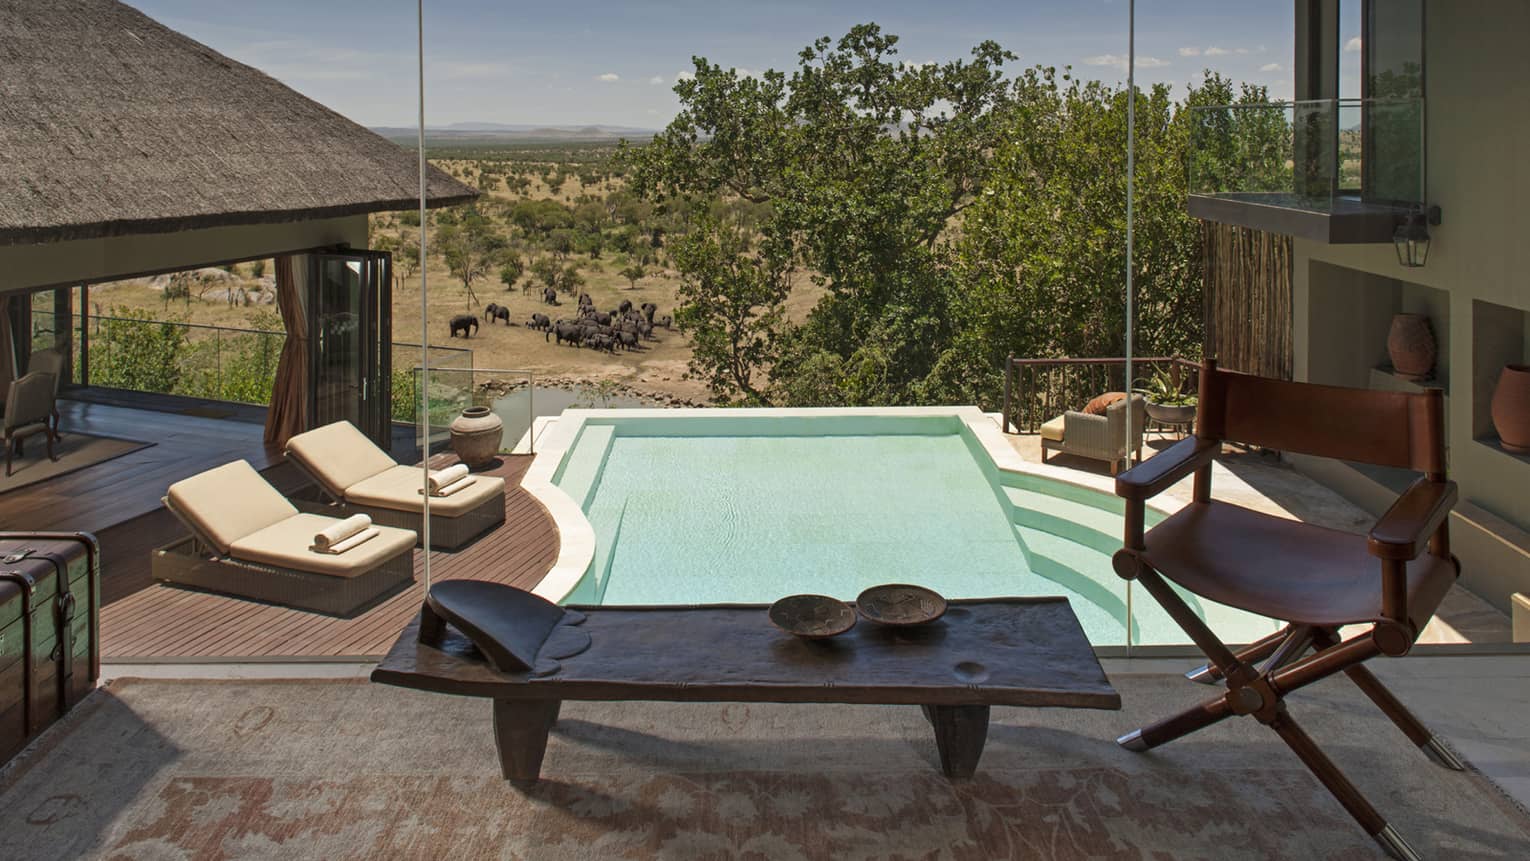 Several lounge chairs are set up surrounding a pool, all overlooking the horizon on the Serengeti